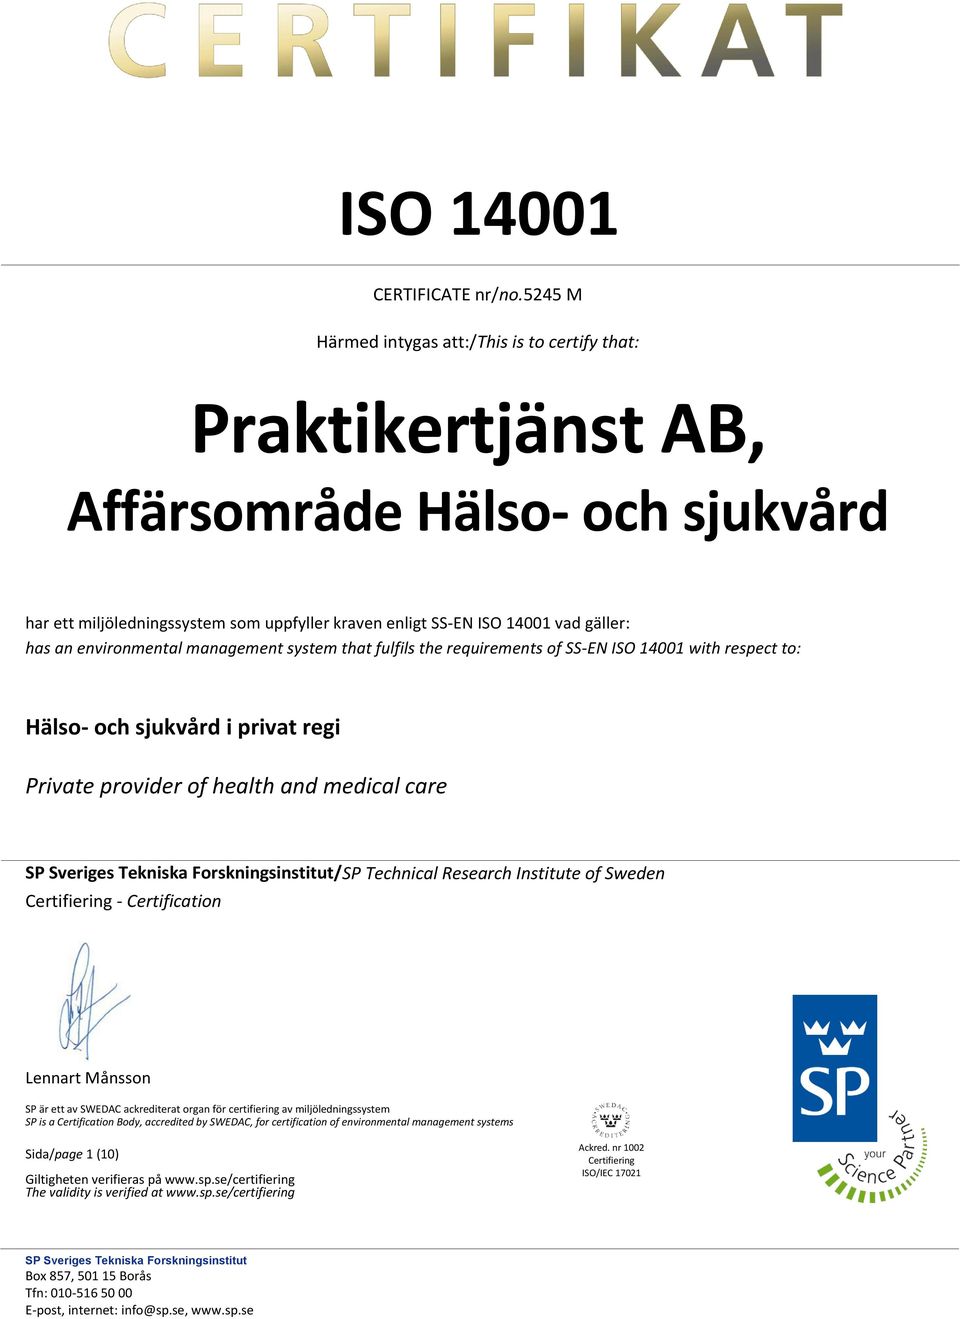 management system that fulfils the requirements of SS-EN ISO 14001 with respect to: Hälso- och sjukvård i privat regi Private provider of health and medical care /SP Technical Research Institute of